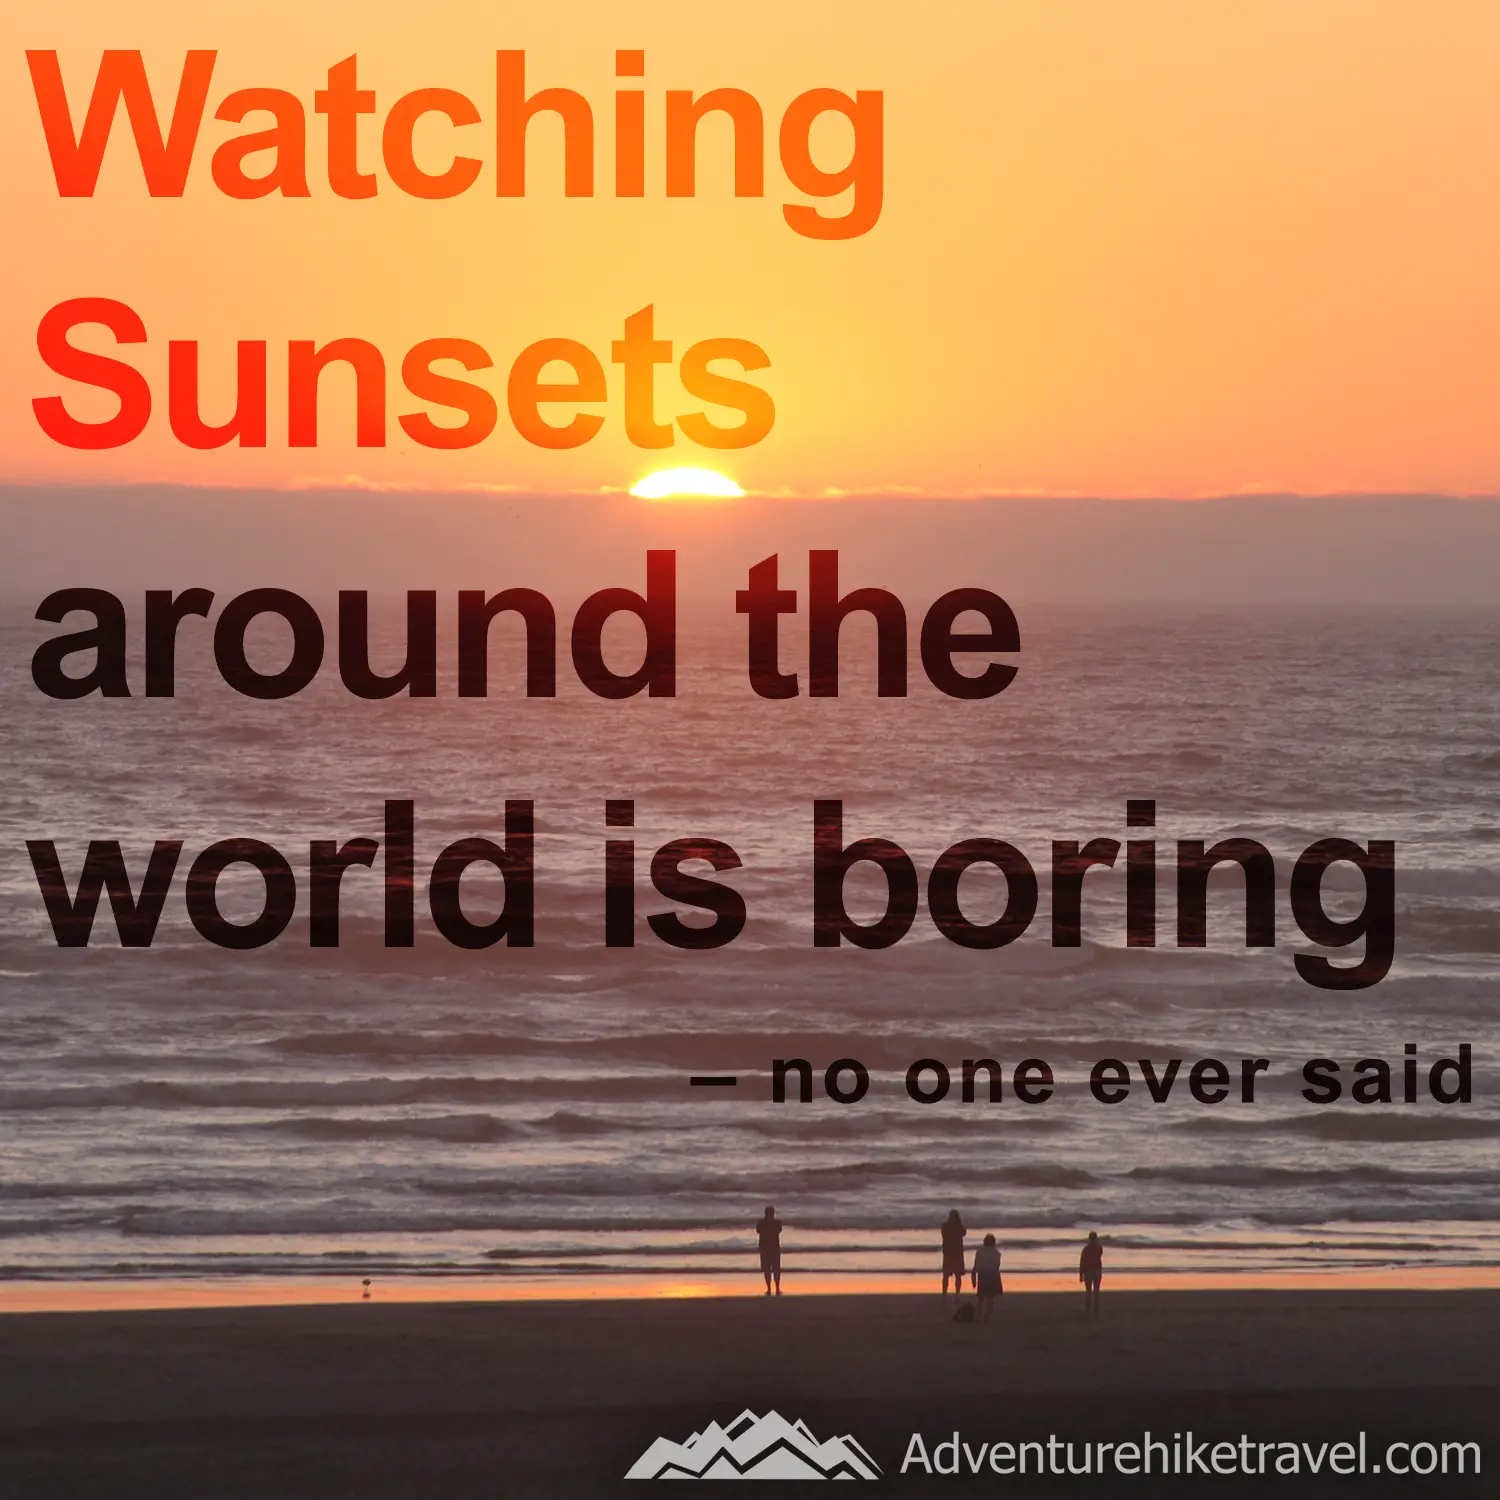 Watching Sunsets around the world is boring. - no one ever said #hiking #quotes #inspirationalquotes #hikingquotes #adventurequotes #outdoors #trekking